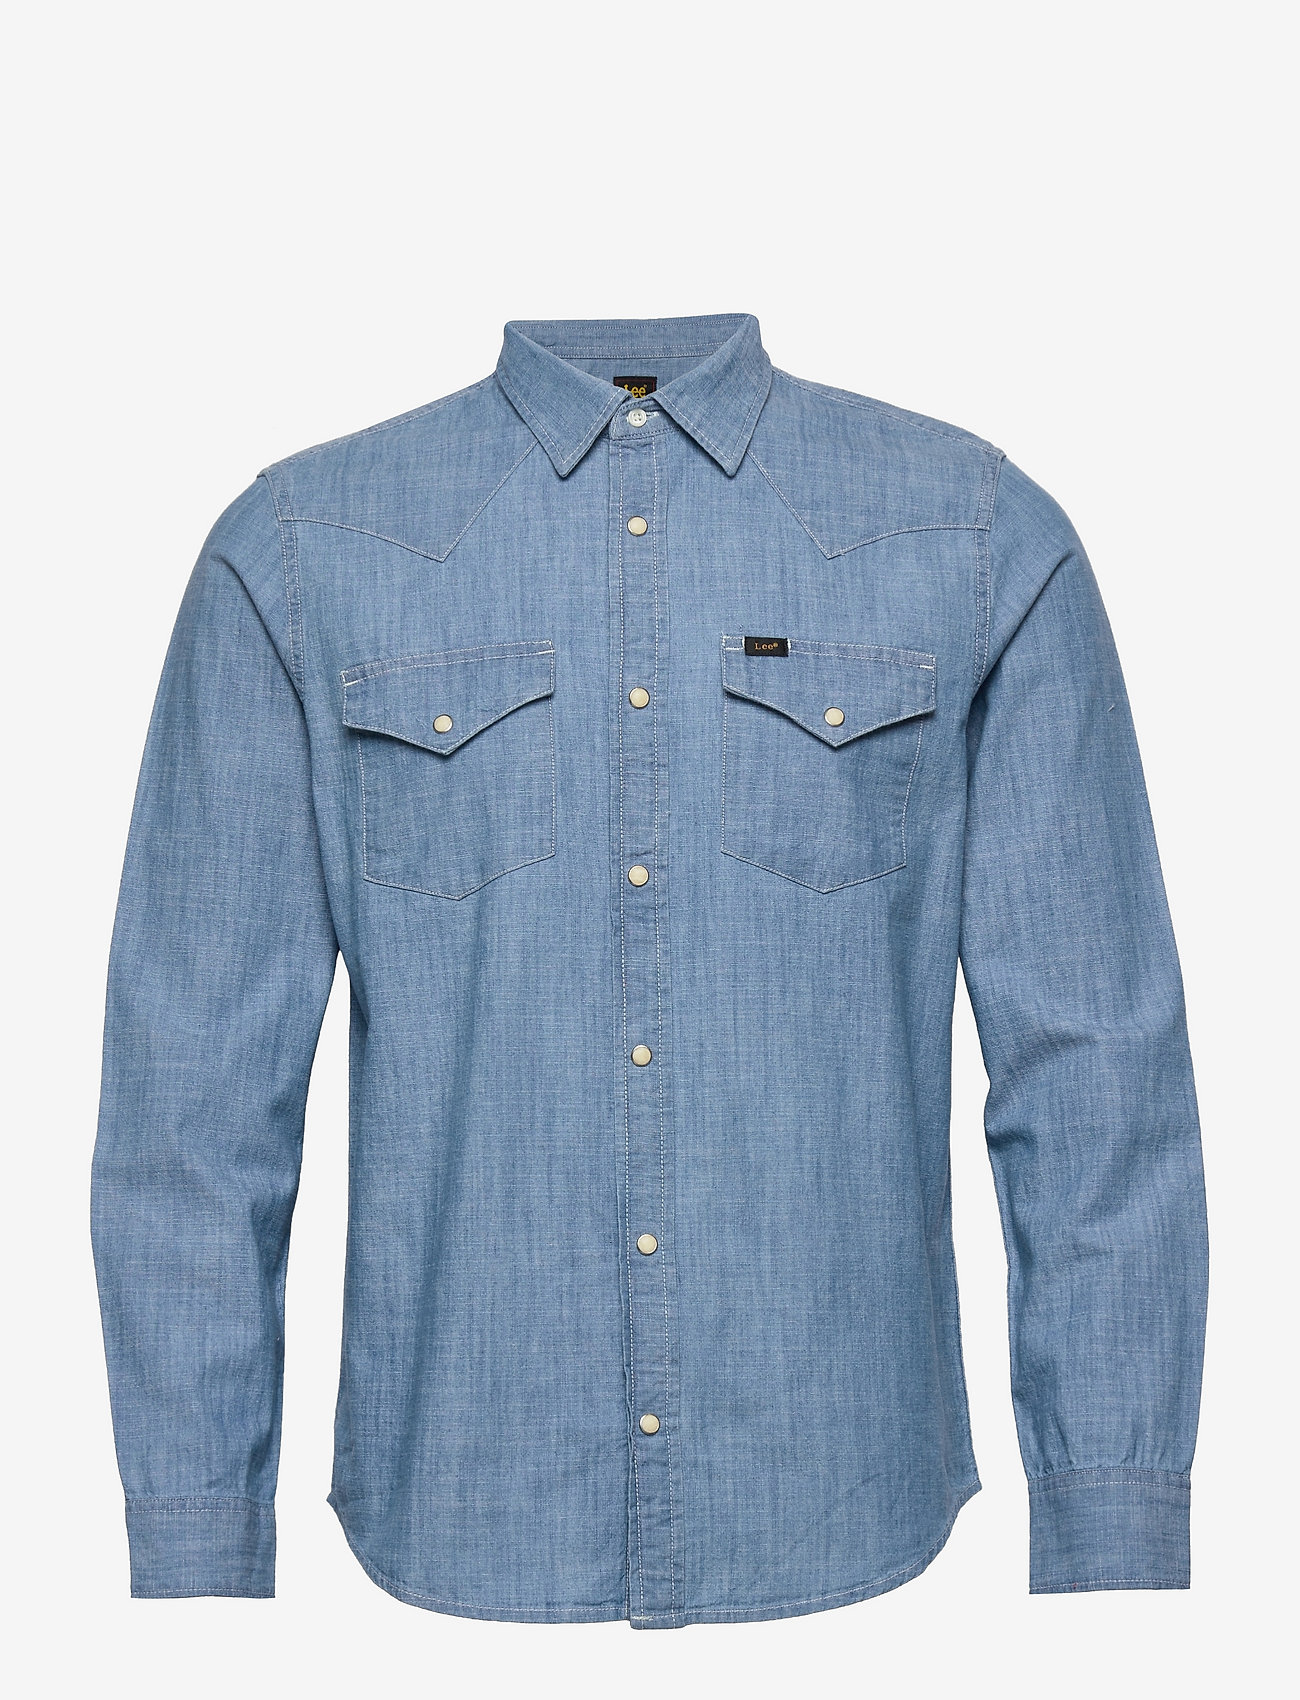 vold Sult beton Lee Jeans Regular Western - Casual shirts - Boozt.com